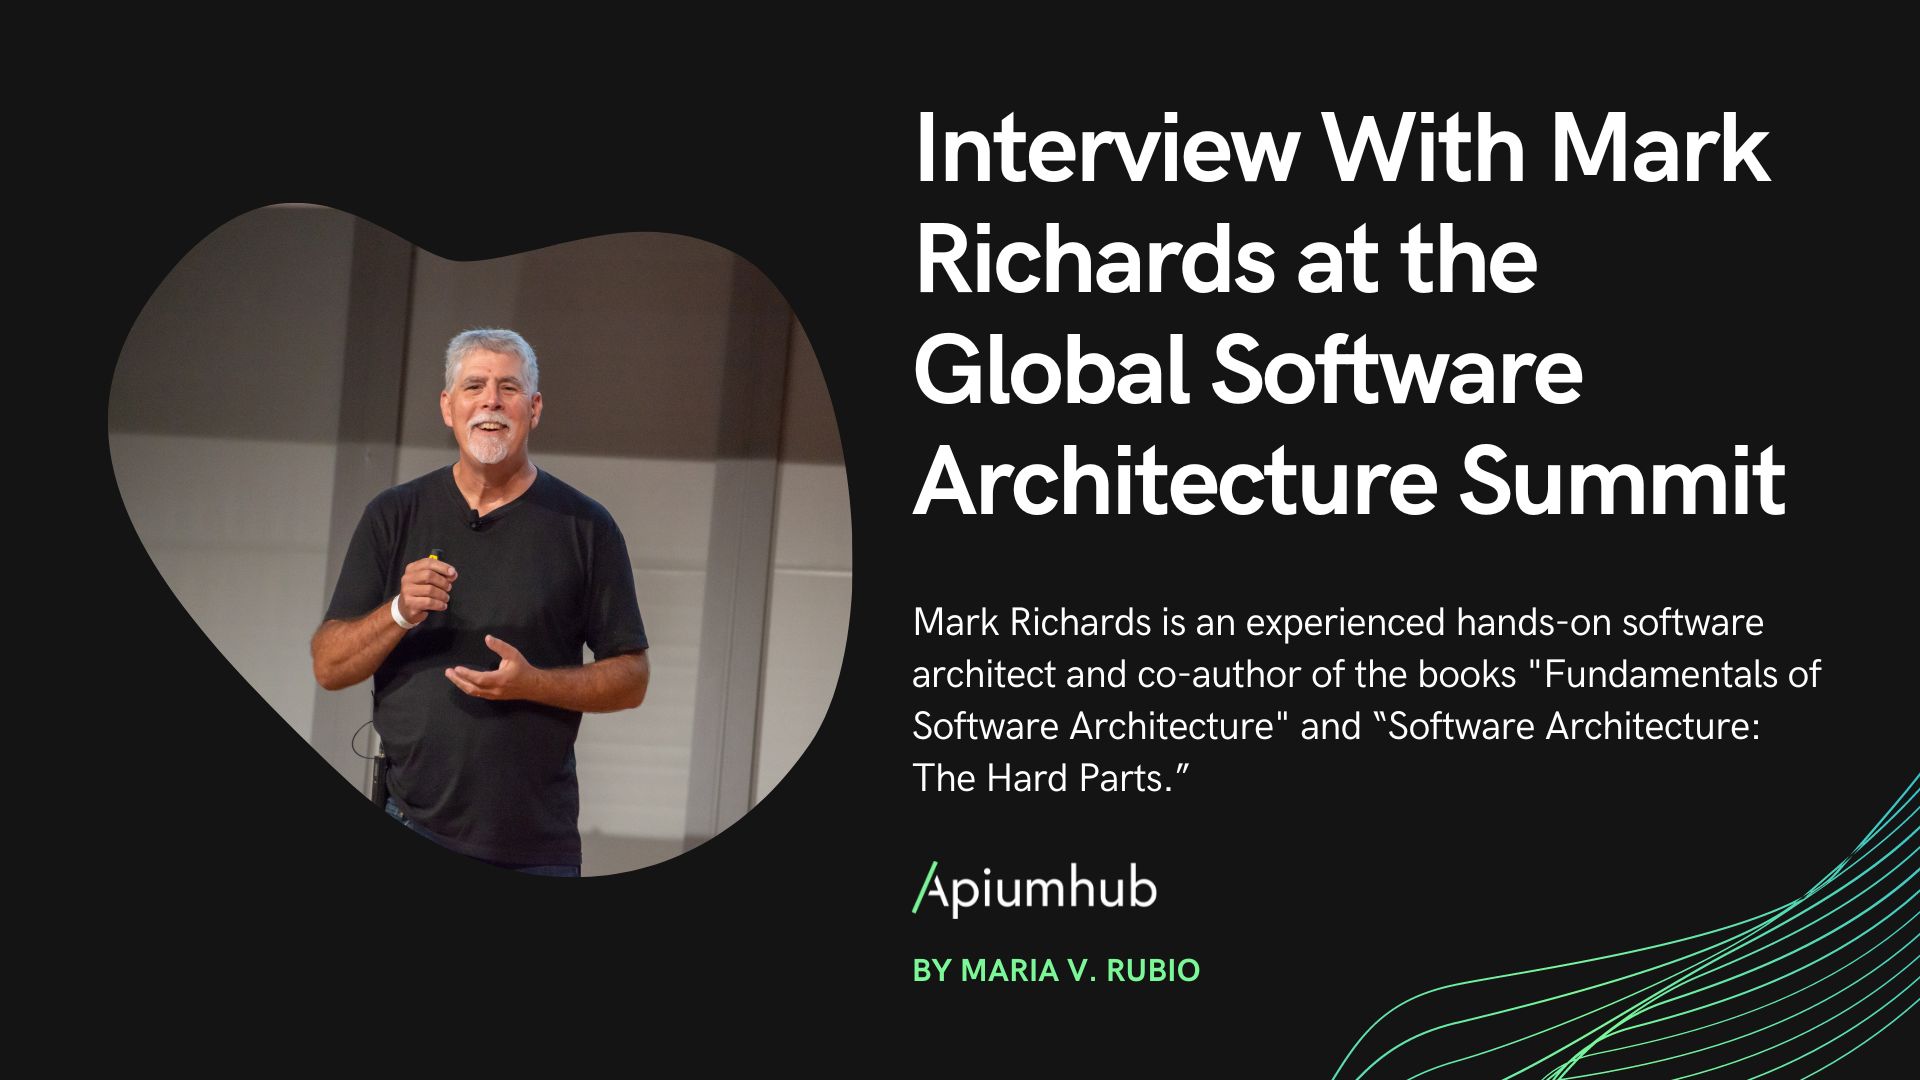 Interview With Mark Richards at the Global Software Architecture Summit